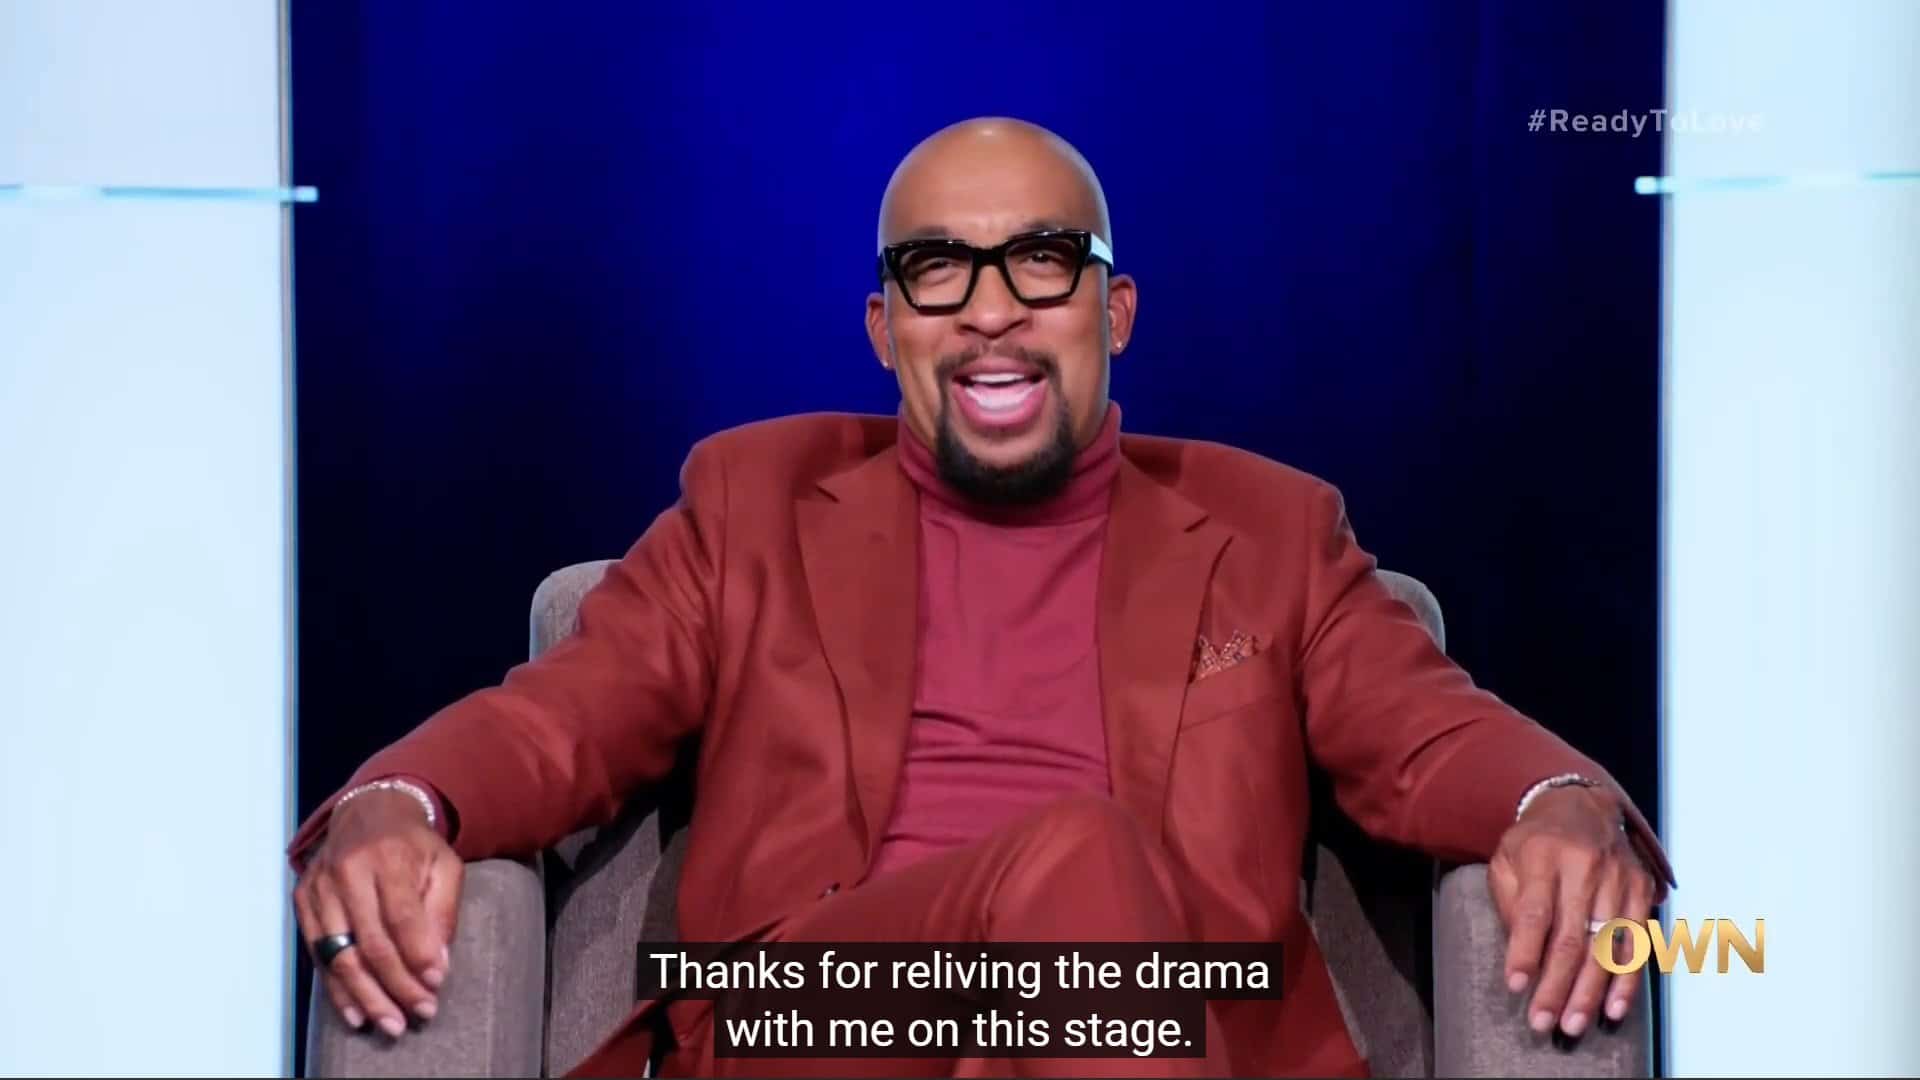 Tommy thanking viewers